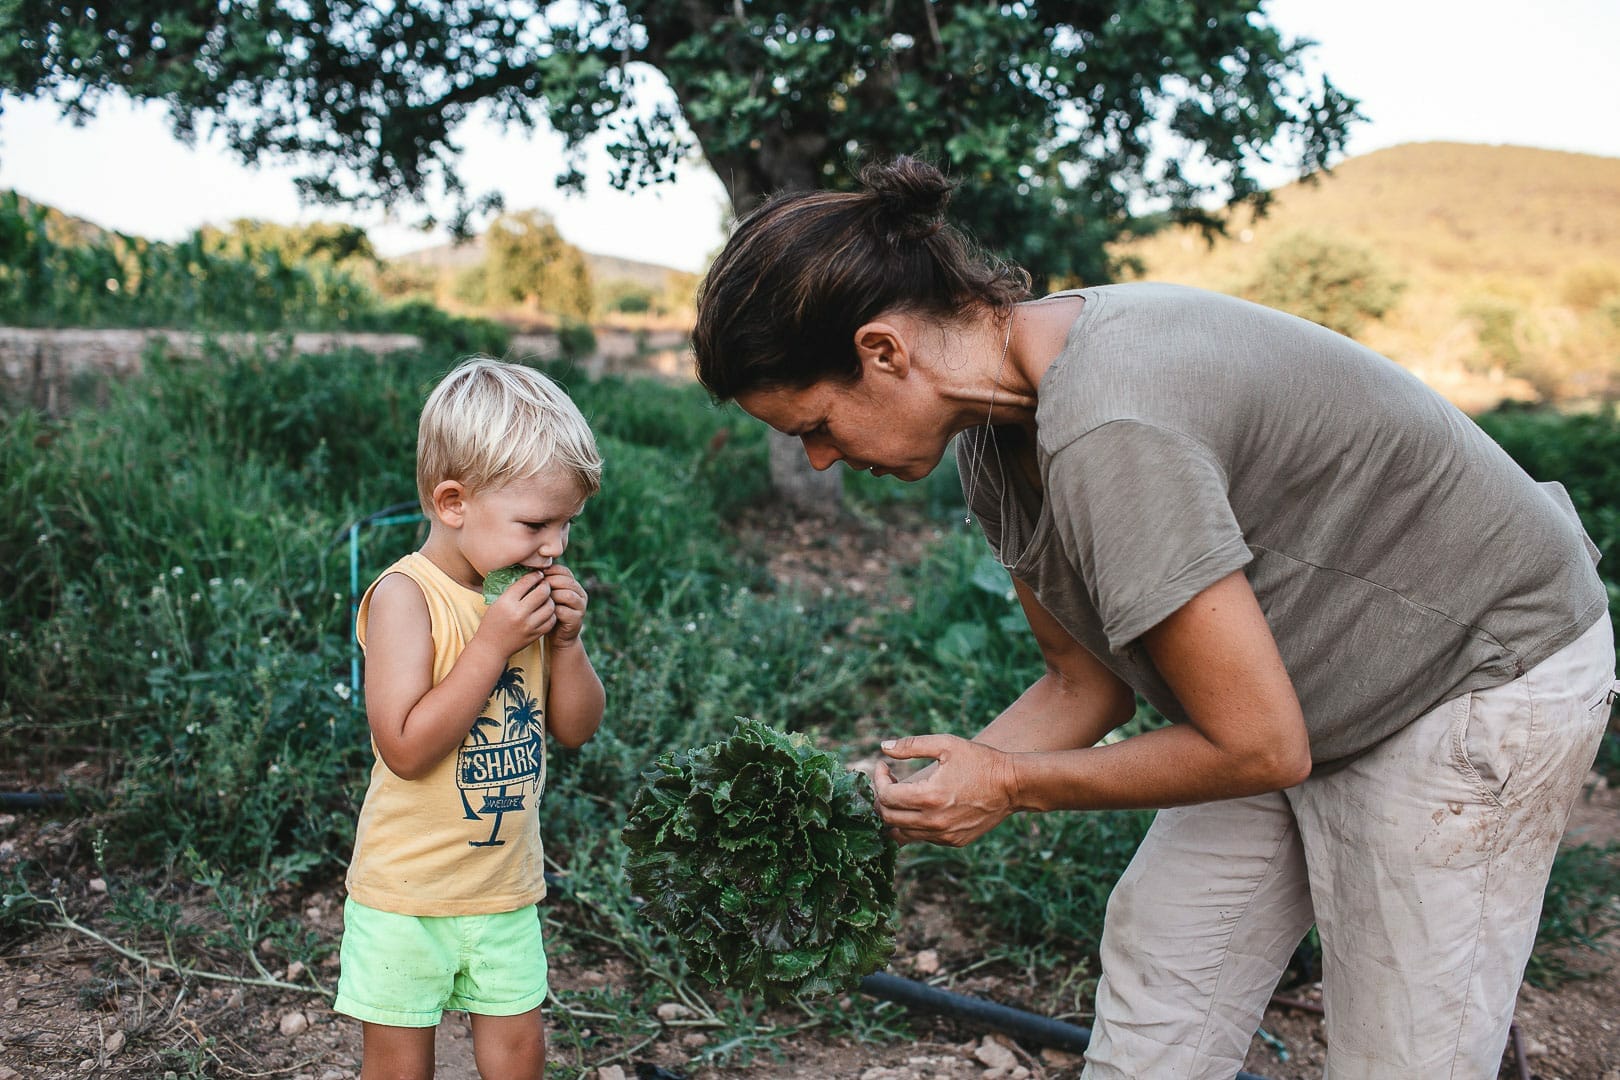 Family moment of a child eating fresh lettuce recently harvested by his mother from the Can Puvil garden in Ibiza